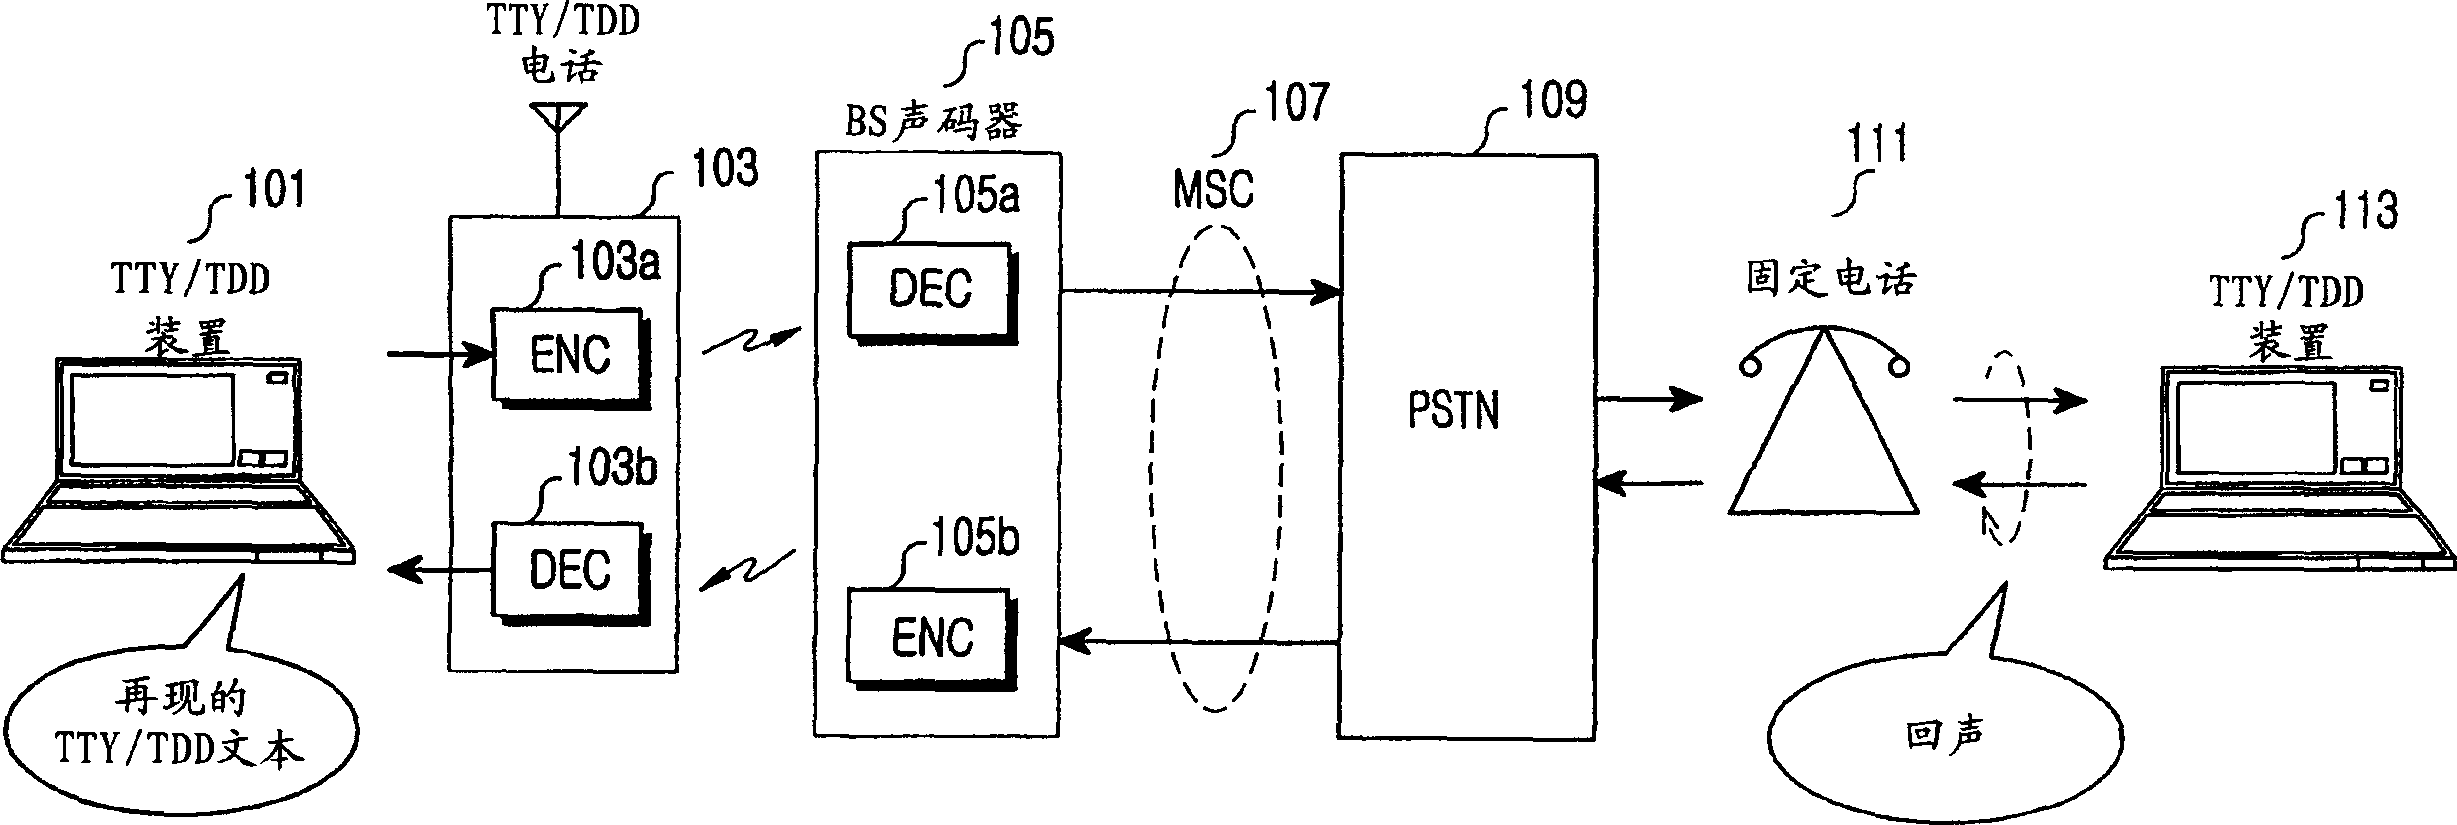 Method and apparatus for acoustic ECHO cancellation in a communication system providing TTY/TDD service